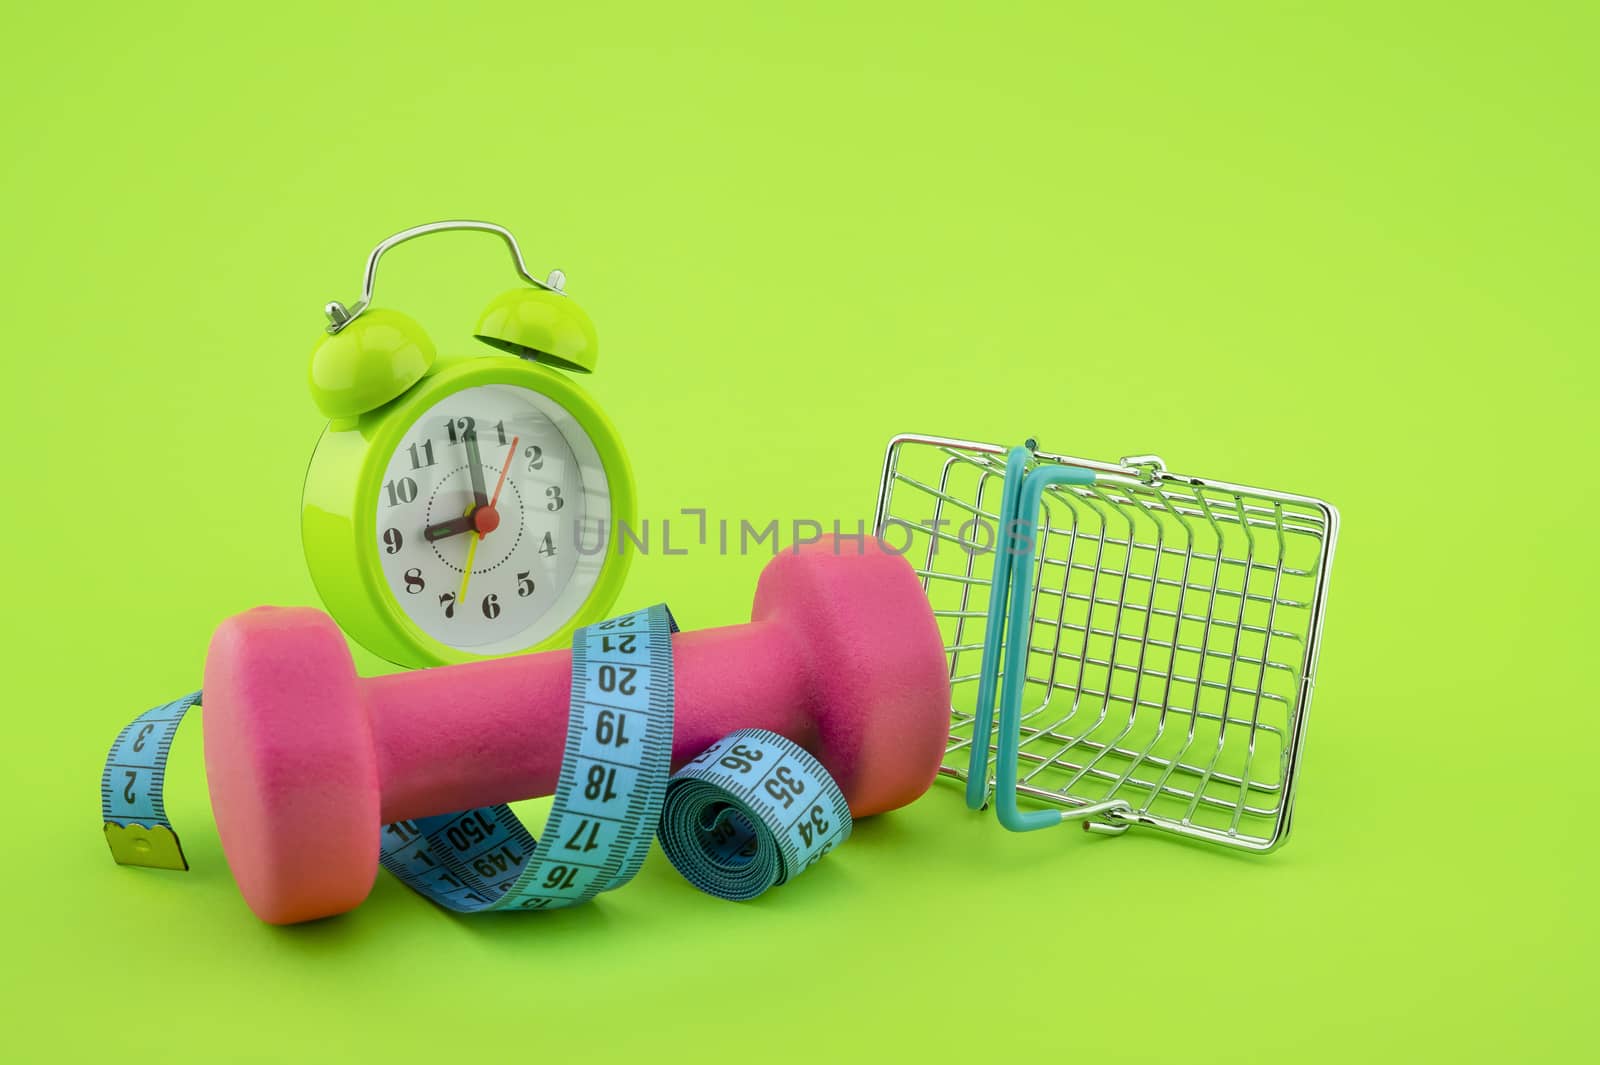 Going shopping for sports diet concept still life with dumbbells, measuring tape, alarm clock and wire shopping basket on green background